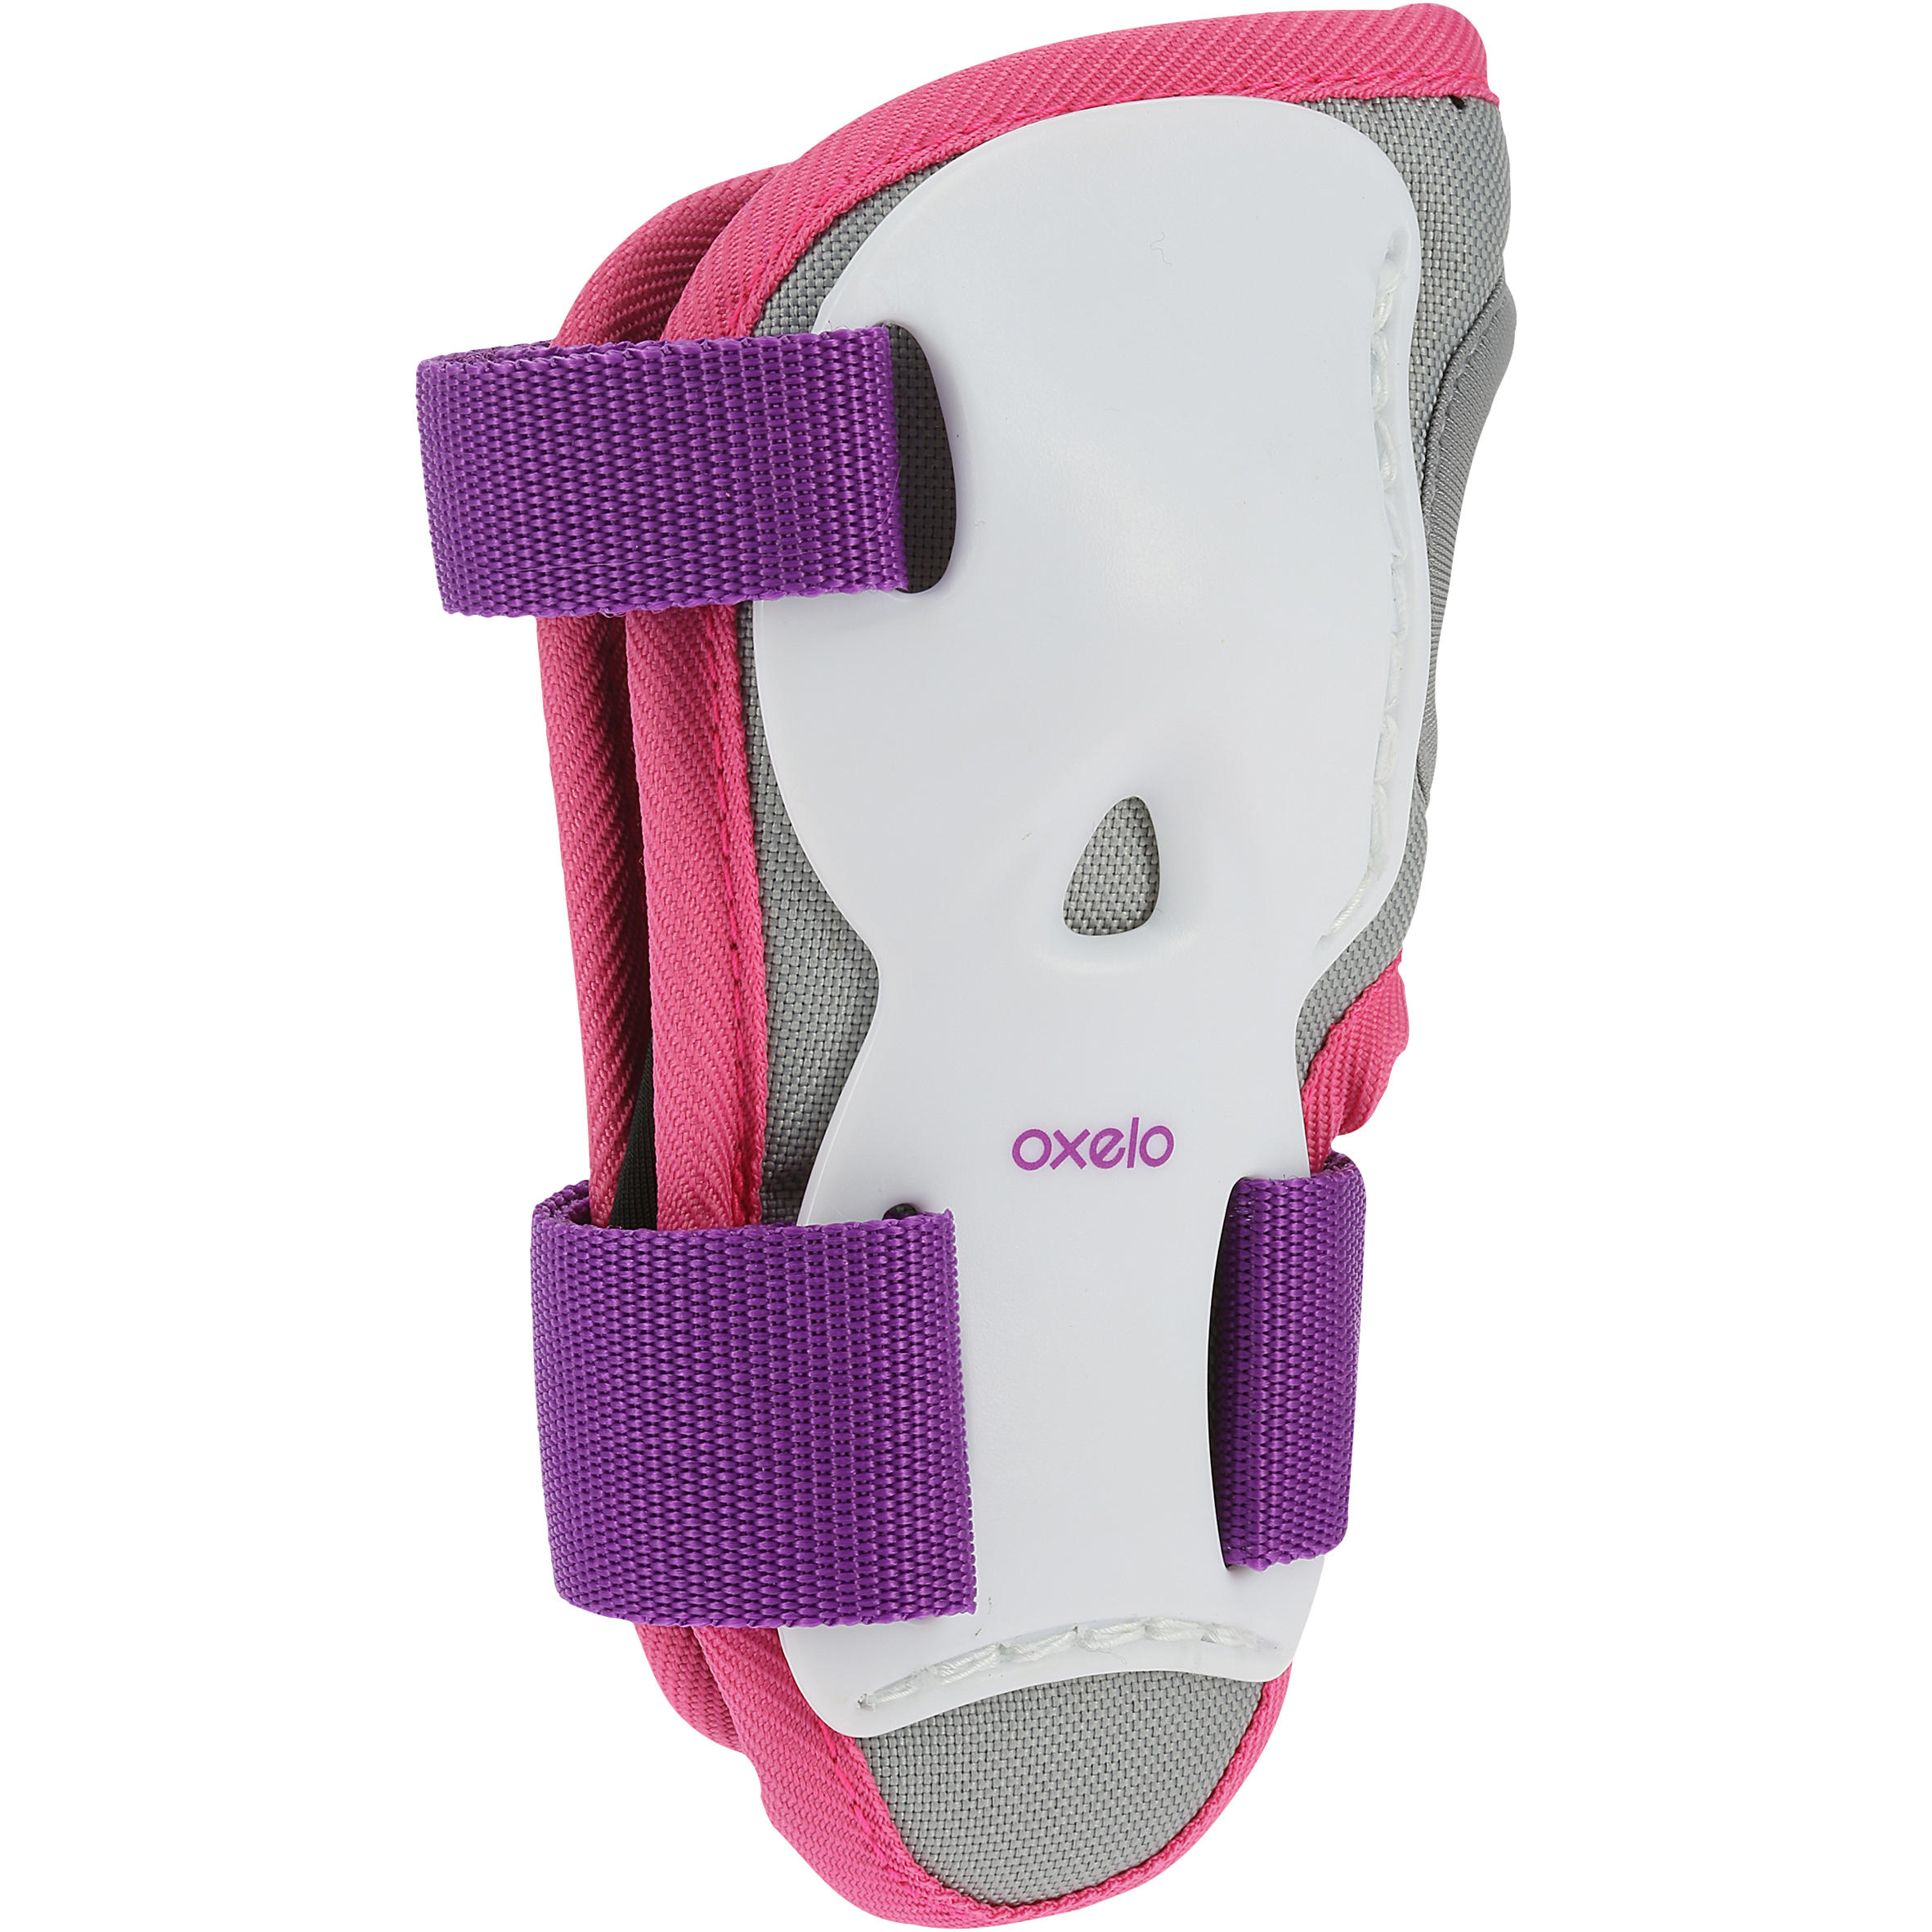 Play Kids' 3-Piece Skating Skateboarding Scooter Protective Gear - Purple 4/9